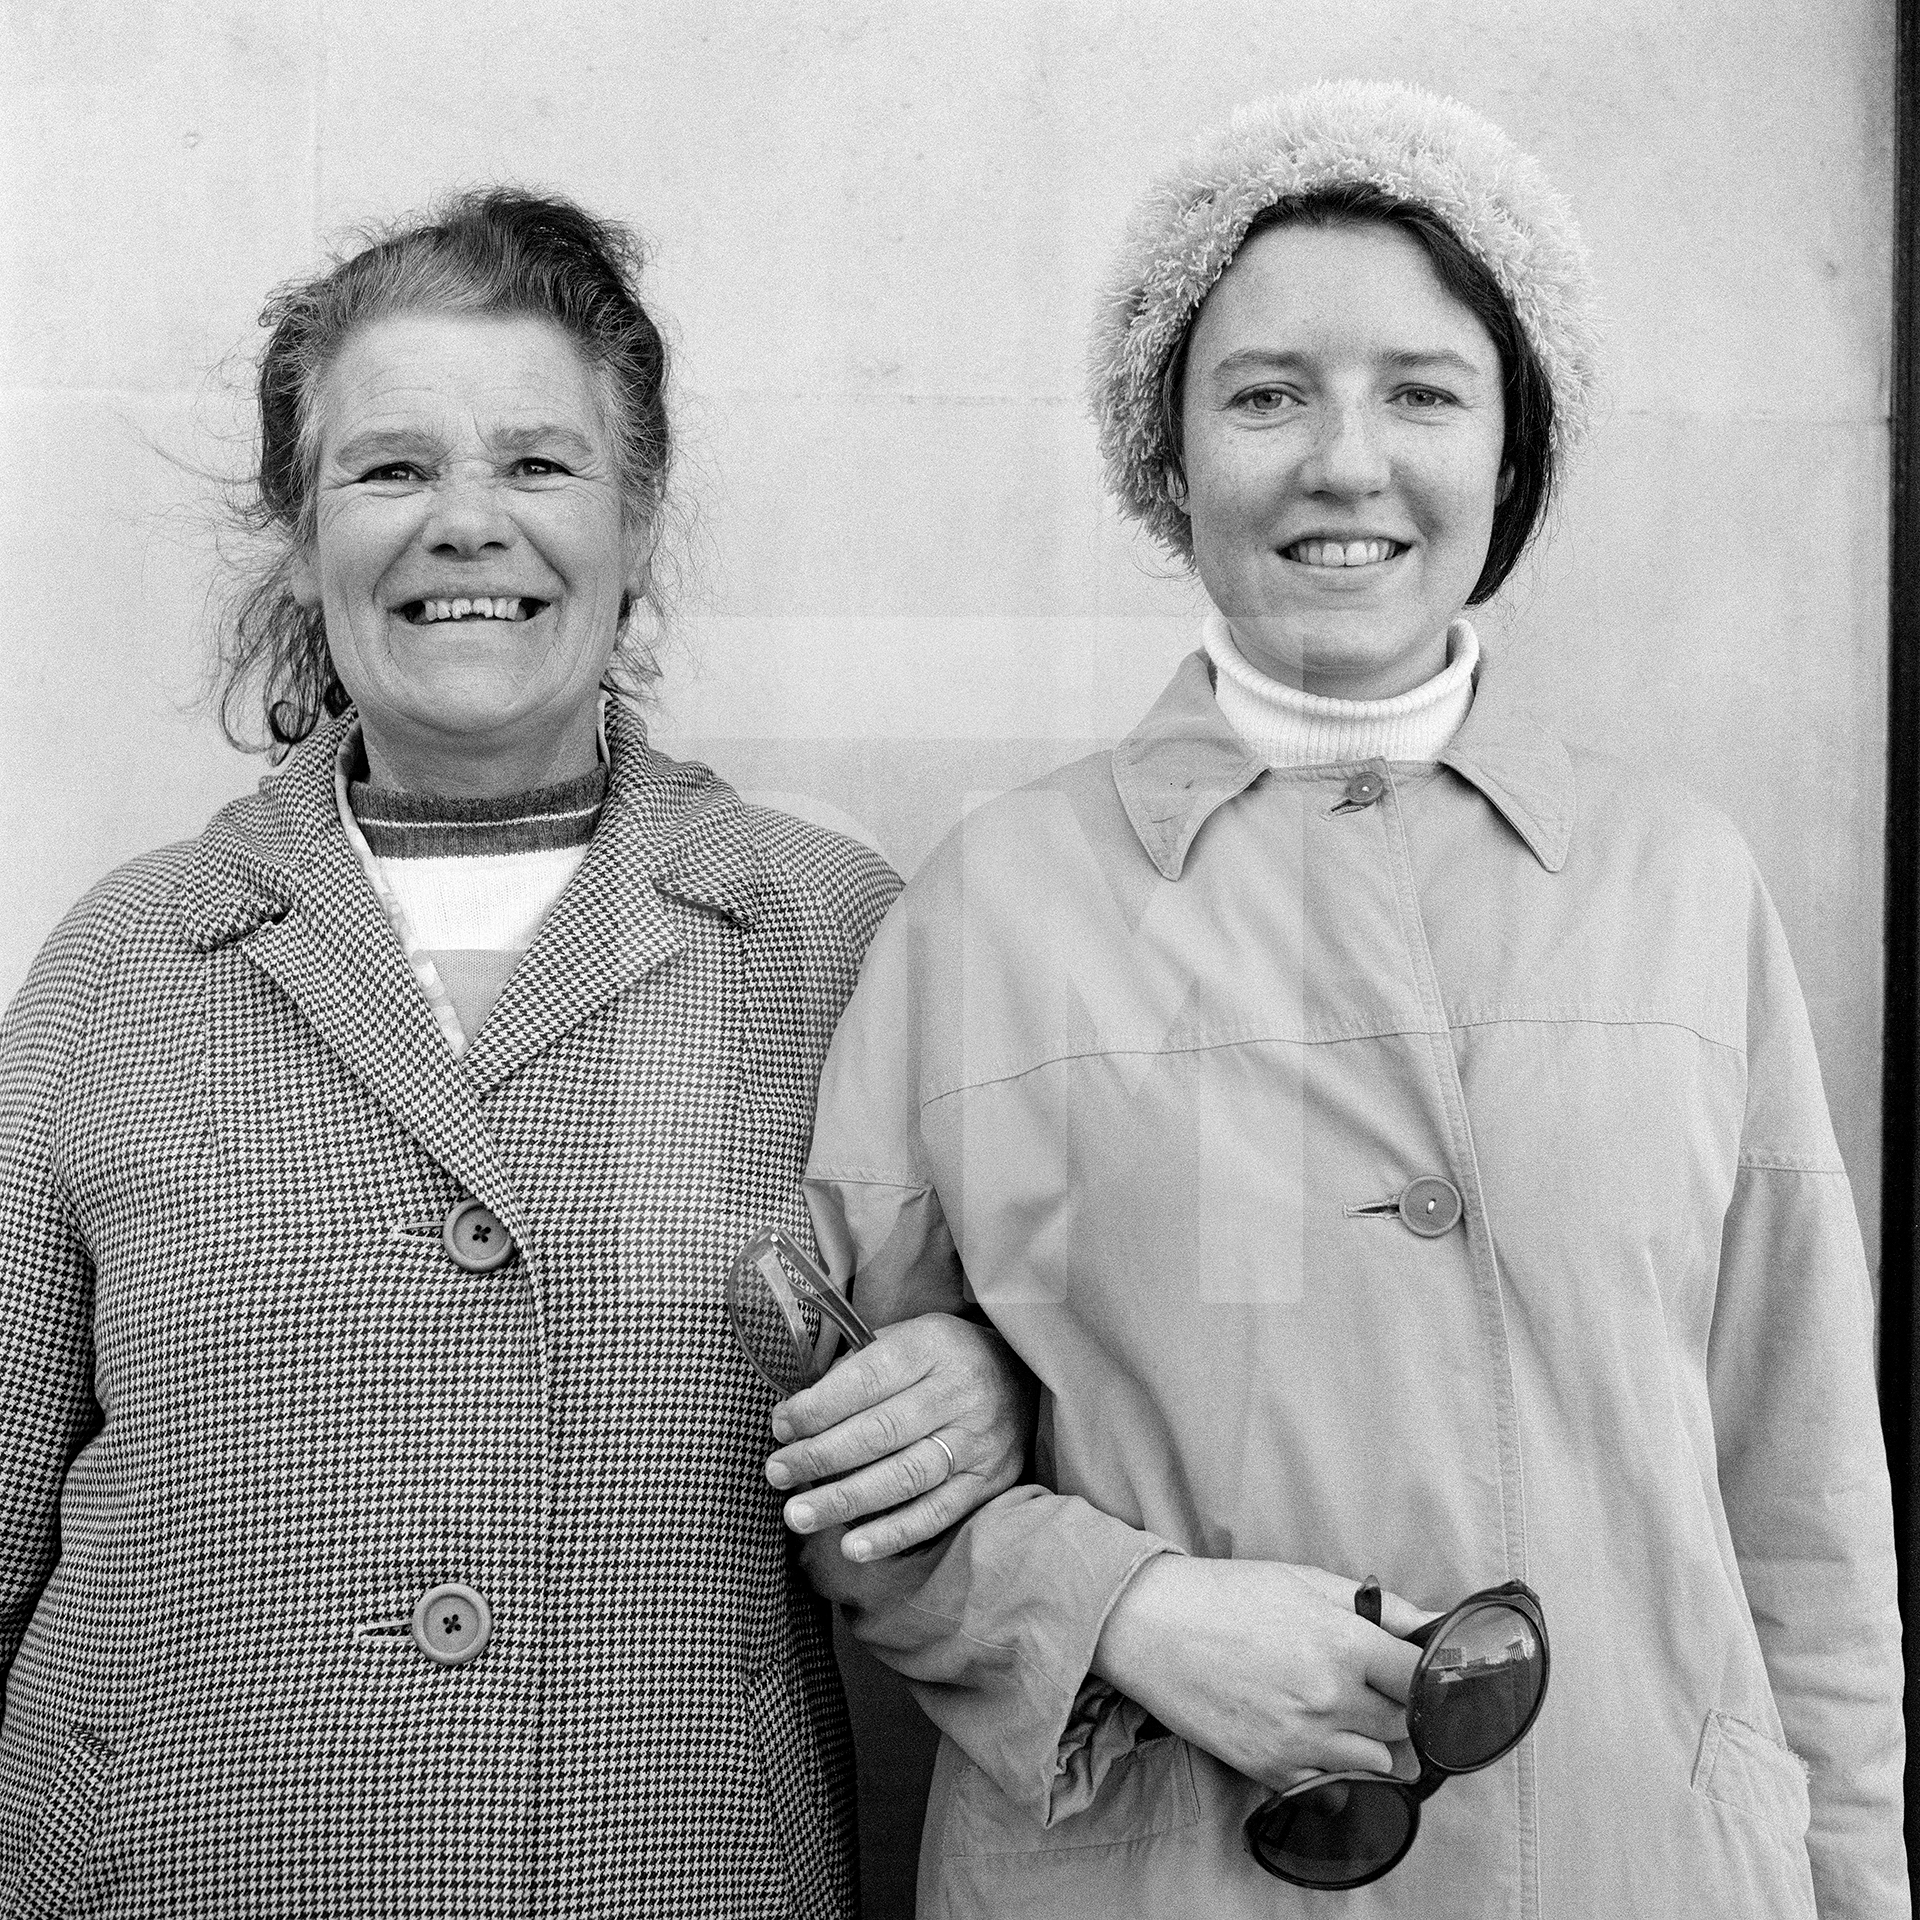 Mother and daughter, May and Melody 'Molly' Gower, Southampton. May 1974 by Daniel Meadows